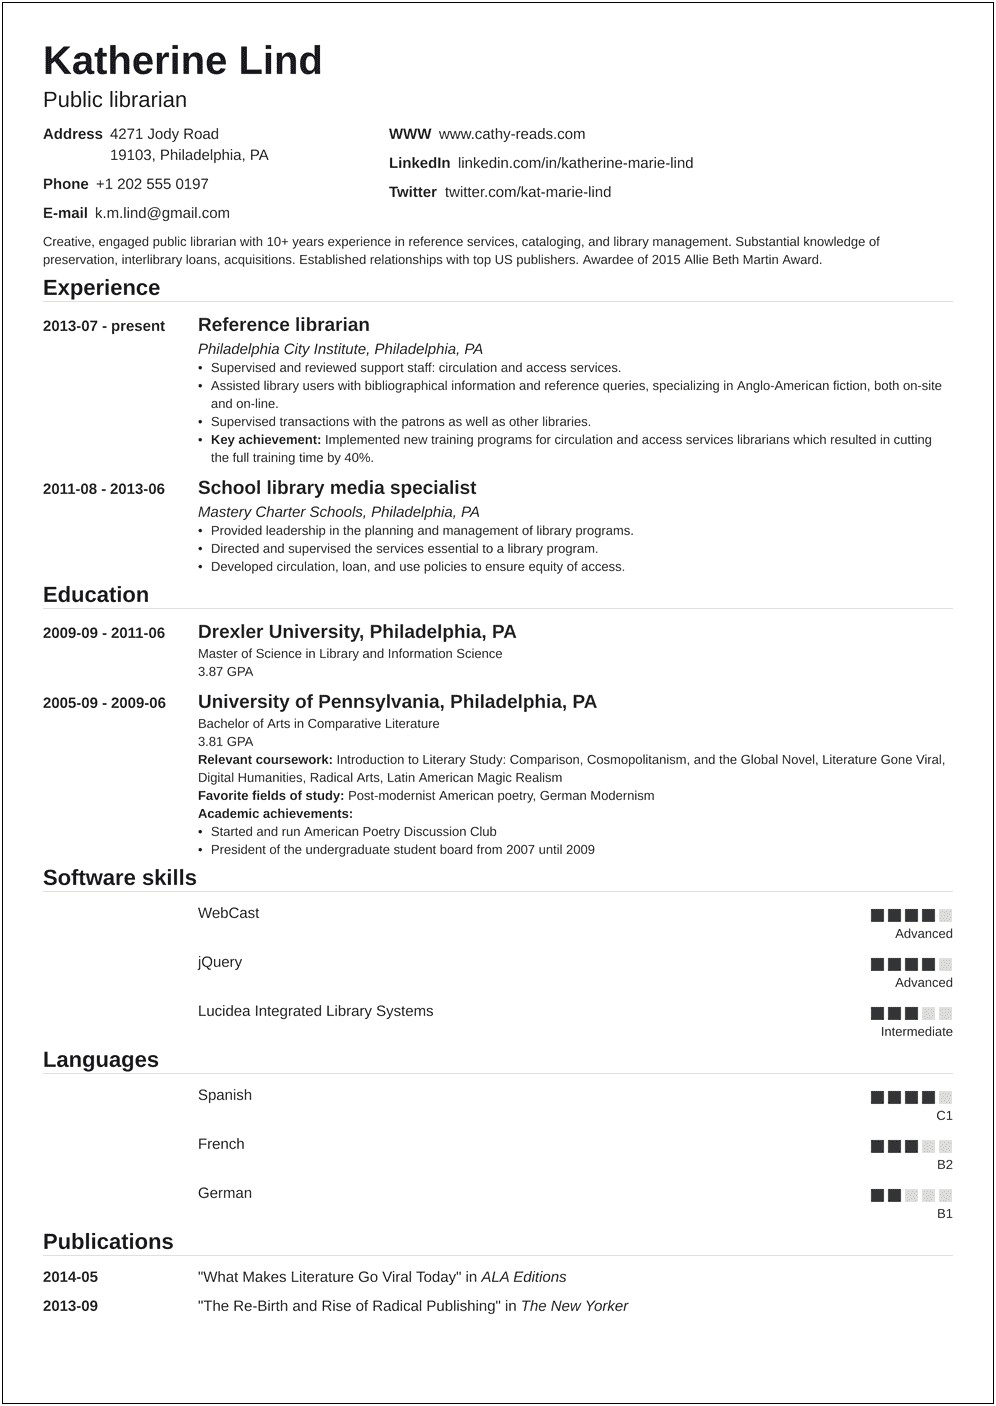 Resume Retail Experience For Working In A Library